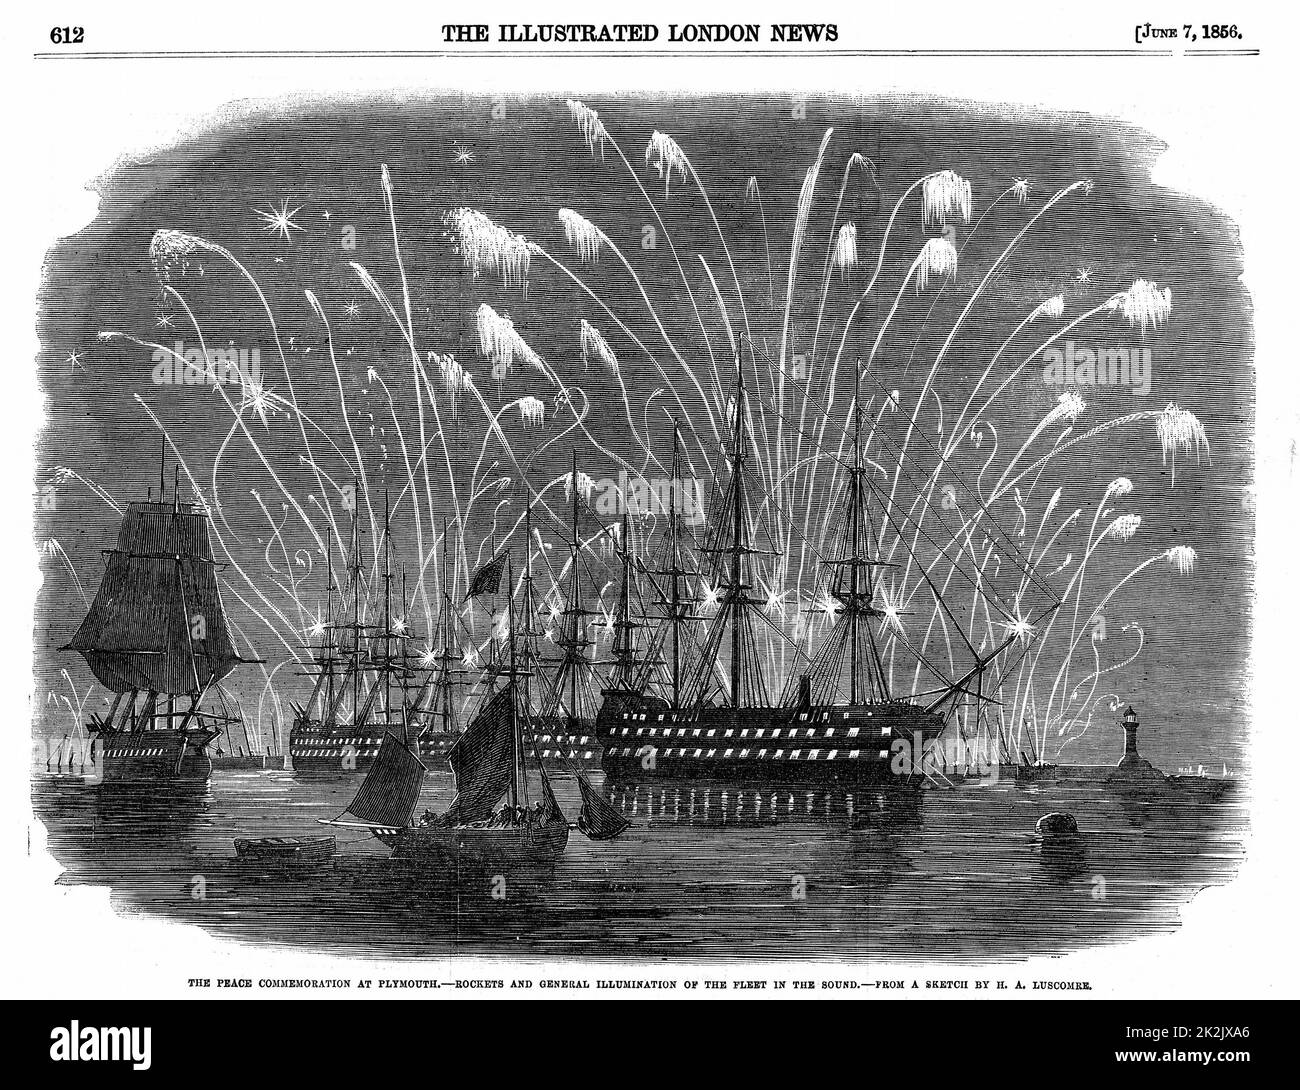 Russo-Turkish (Crimean) WAR 1853-6. Peace commemorations at Plymouth, England. Rockets and general illumination of the fleet in Plymouth sound. From 'The Illustrated London News', 1 June 1856 Stock Photo